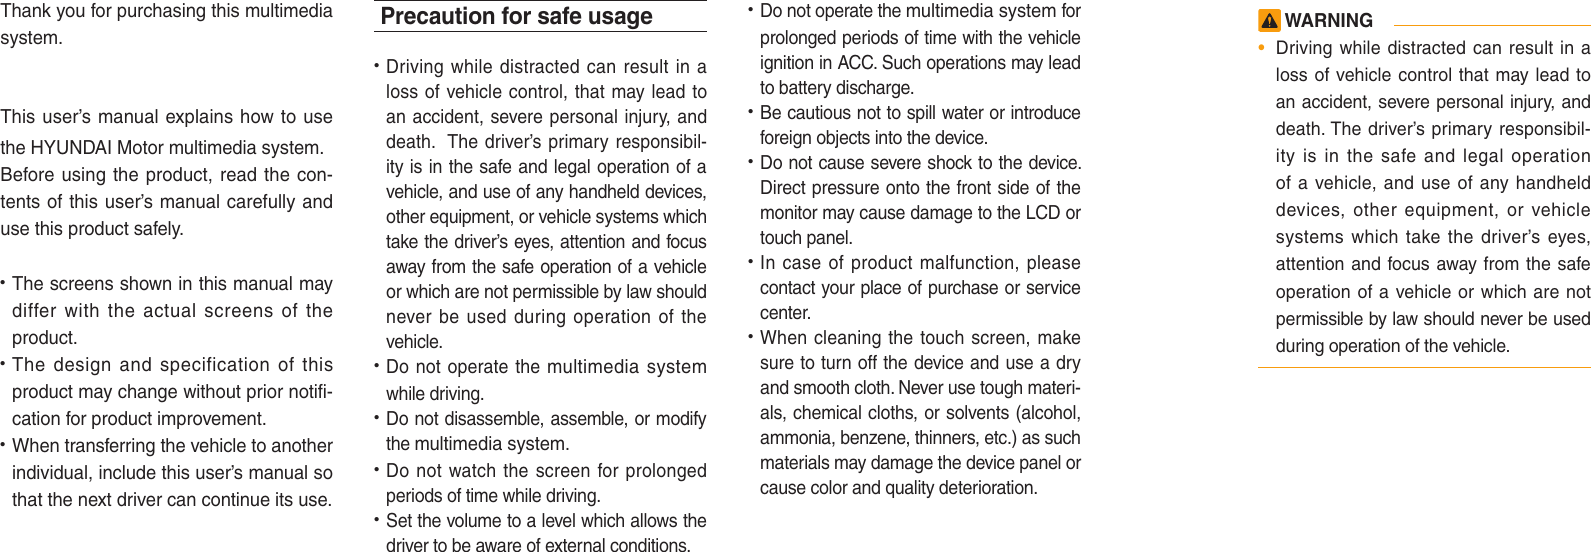 Thank you for purchasing this multimedia system.This user’s manual explains how to use the HYUNDAI Motor multimedia system.Before using the product, read the con-tents of this user’s manual carefully and use this product safely.• The screens shown in this manual maydiffer with the actual screens of theproduct.• The design and specification of thisproduct may change without prior notifi-cation for product improvement.• When transferring the vehicle to anotherindividual, include this user’s manual sothat the next driver can continue its use.Precaution for safe usage•   Driving while distracted can result in aloss of vehicle control, that may lead toan accident, severe personal injury, anddeath.  The driver’s primary responsibil-ity is in the safe and legal operation of avehicle, and use of any handheld devices,other equipment, or vehicle systems whichtake the driver’s eyes, attention and focusaway from the safe operation of a vehicleor which are not permissible by law shouldnever be used during operation of thevehicle.• Do not operate the multimedia systemwhile driving. • Do not disassemble, assemble, or modifythe multimedia system.•  Do not watch the screen for prolongedperiods of time while driving. •  Set the volume to a level which allows thedriver to be aware of external conditions.•  Do not operate the multimedia system forprolonged periods of time with the vehicleignition in ACC. Such operations may leadto battery discharge.• Be cautious not to spill water or introduceforeign objects into the device.• Do not cause severe shock to the device.Direct pressure onto the front side of themonitor may cause damage to the LCD ortouch panel. • In case of product malfunction, pleasecontact your place of purchase or servicecenter.• When cleaning the touch screen, makesure to turn off the device and use a dryand smooth cloth. Never use tough materi-als, chemical cloths, or solvents (alcohol,ammonia, benzene, thinners, etc.) as suchmaterials may damage the device panel orcause color and quality deterioration.  WARNING•Driving while distracted can result in aloss of vehicle control that may lead toan accident, severe personal injury, anddeath. The driver’s primary responsibil-ity is in the safe and legal operationof a vehicle, and use of any handhelddevices, other equipment, or vehiclesystems which take the driver’s eyes,attention and focus away from the safeoperation of a vehicle or which are notpermissible by law should never be usedduring operation of the vehicle.